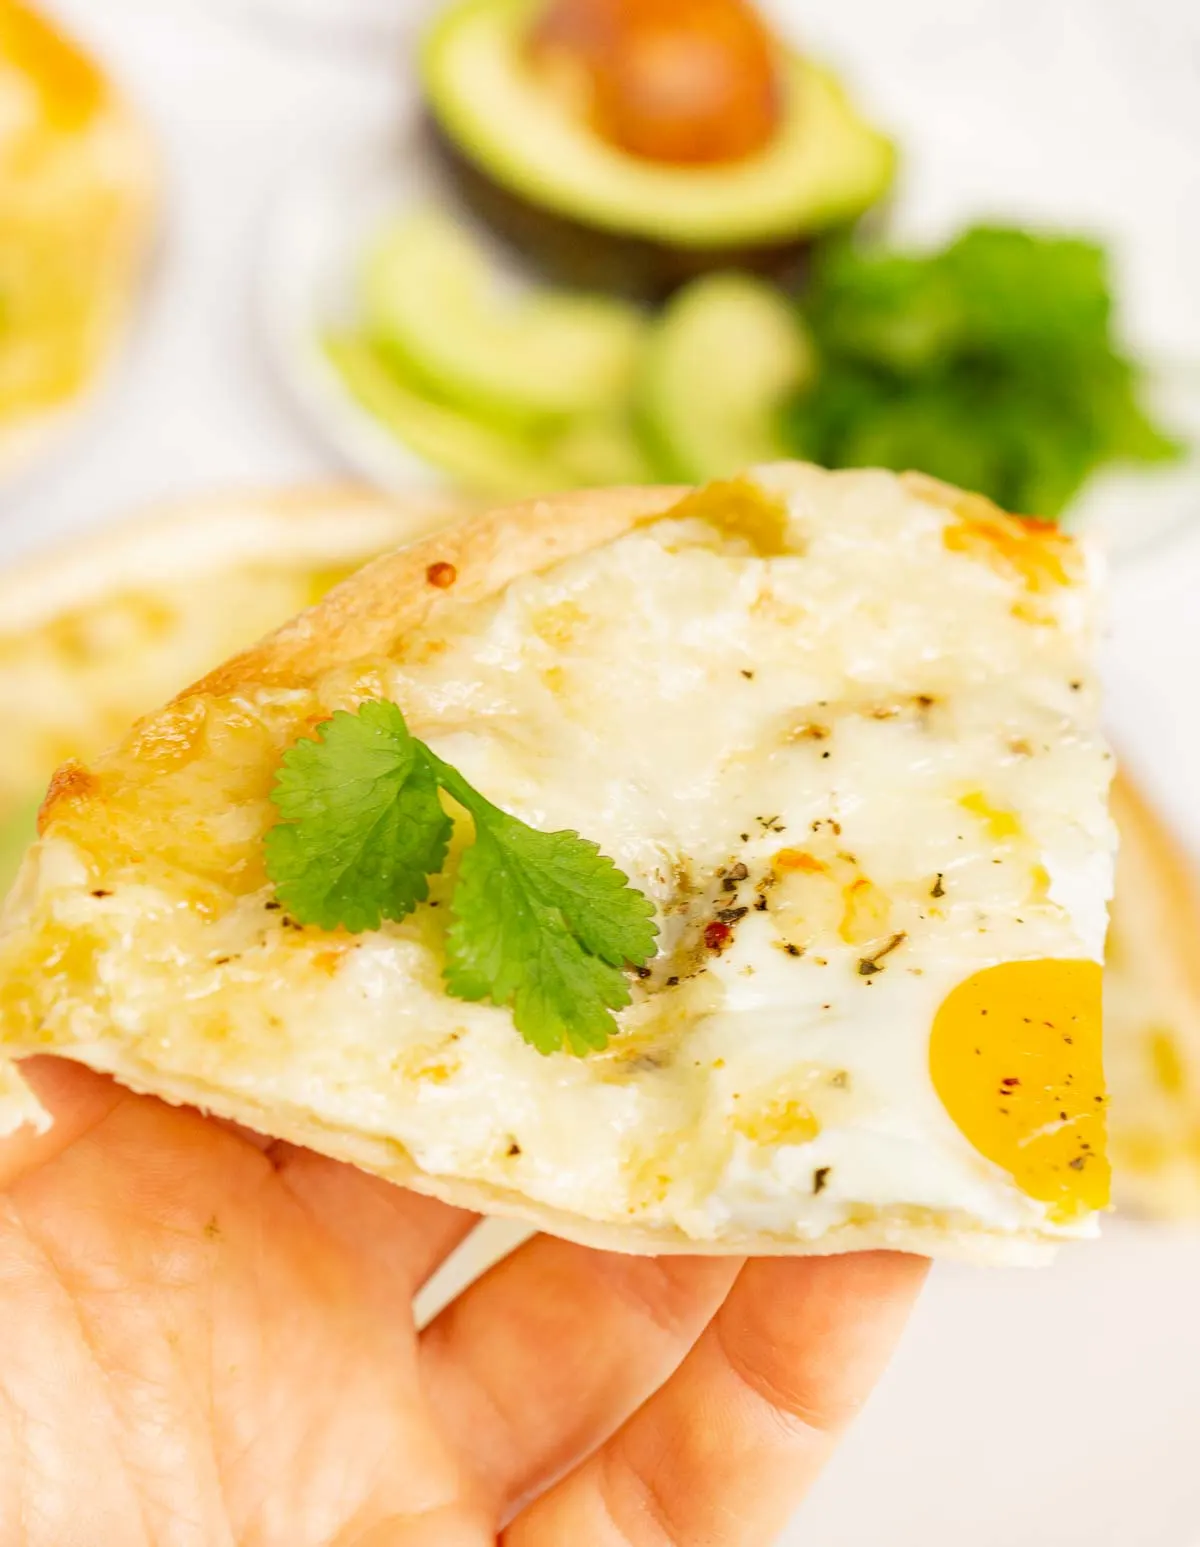 Hand holding slice of Mexican-style tortilla breakfast pizza